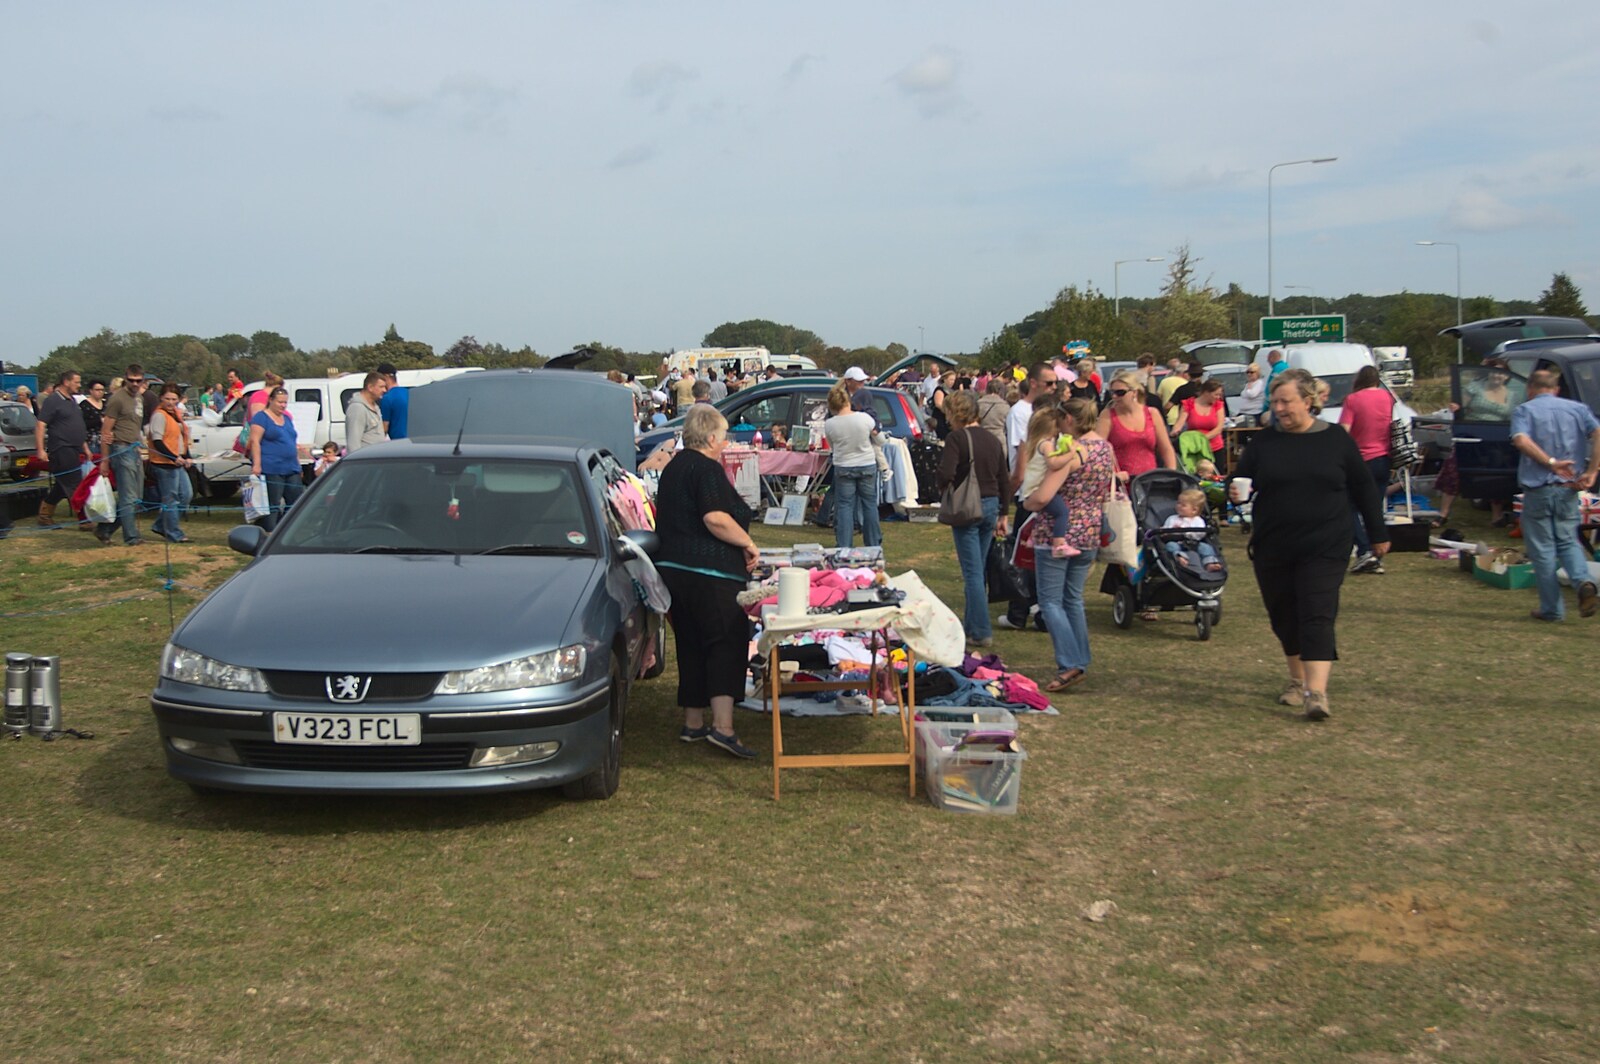 We visit a car boot sale on the A11 from Fred's Birthday and Mildenhall Camping, Suffolk - 25th September 2011